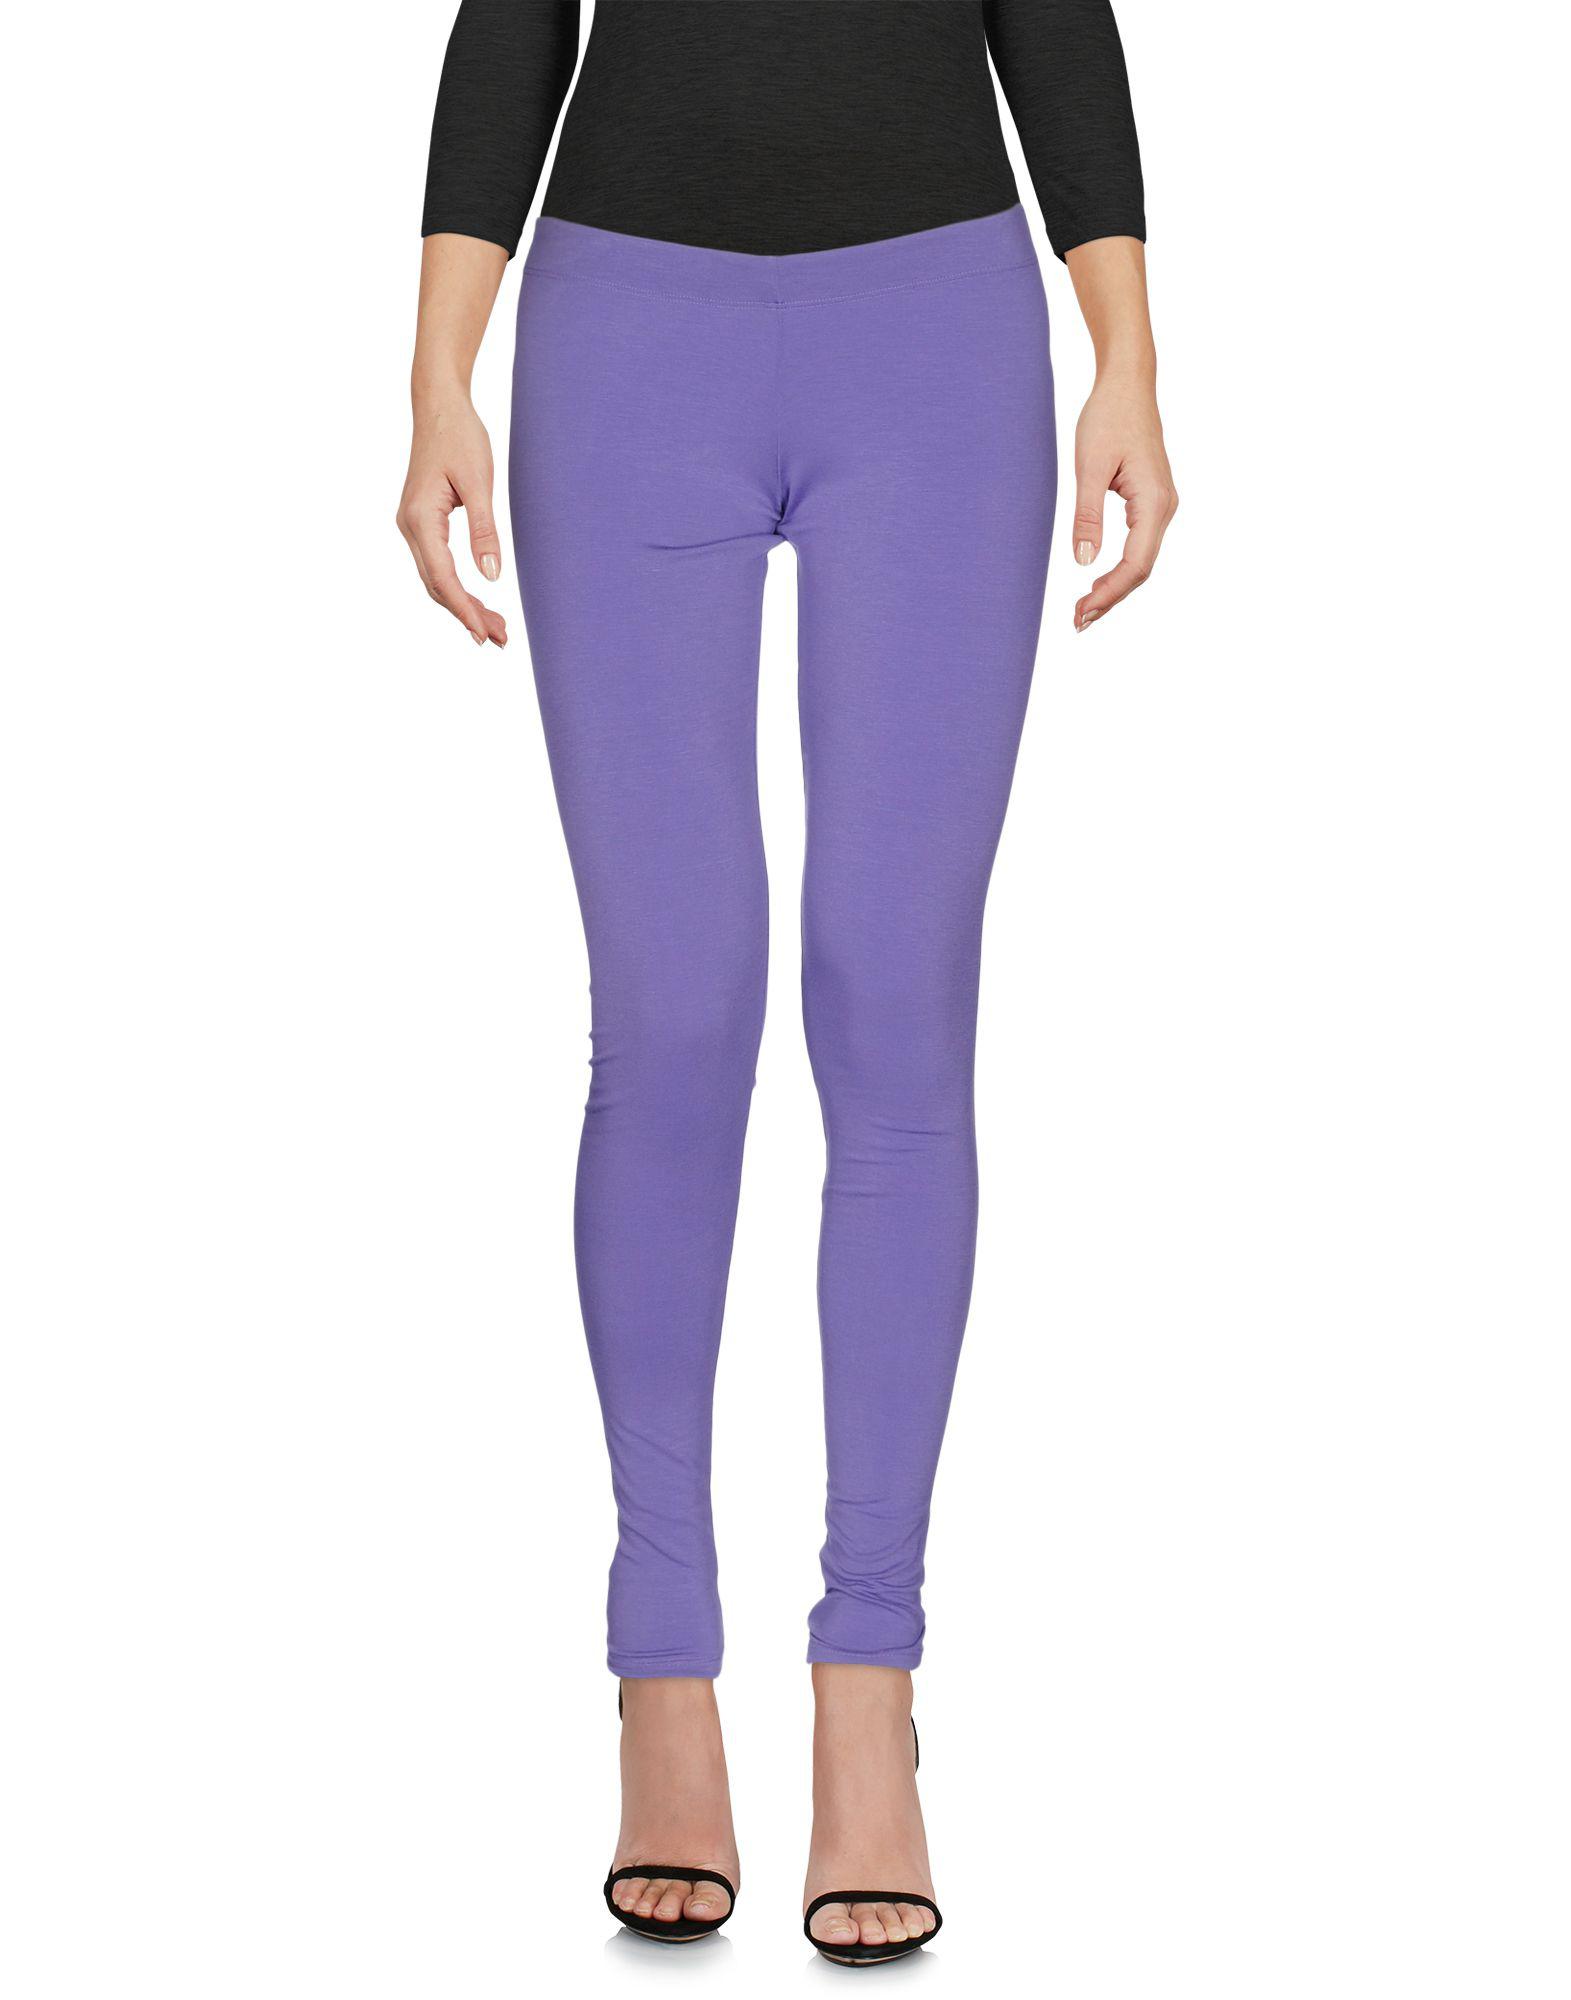 what goes with light purple leggings